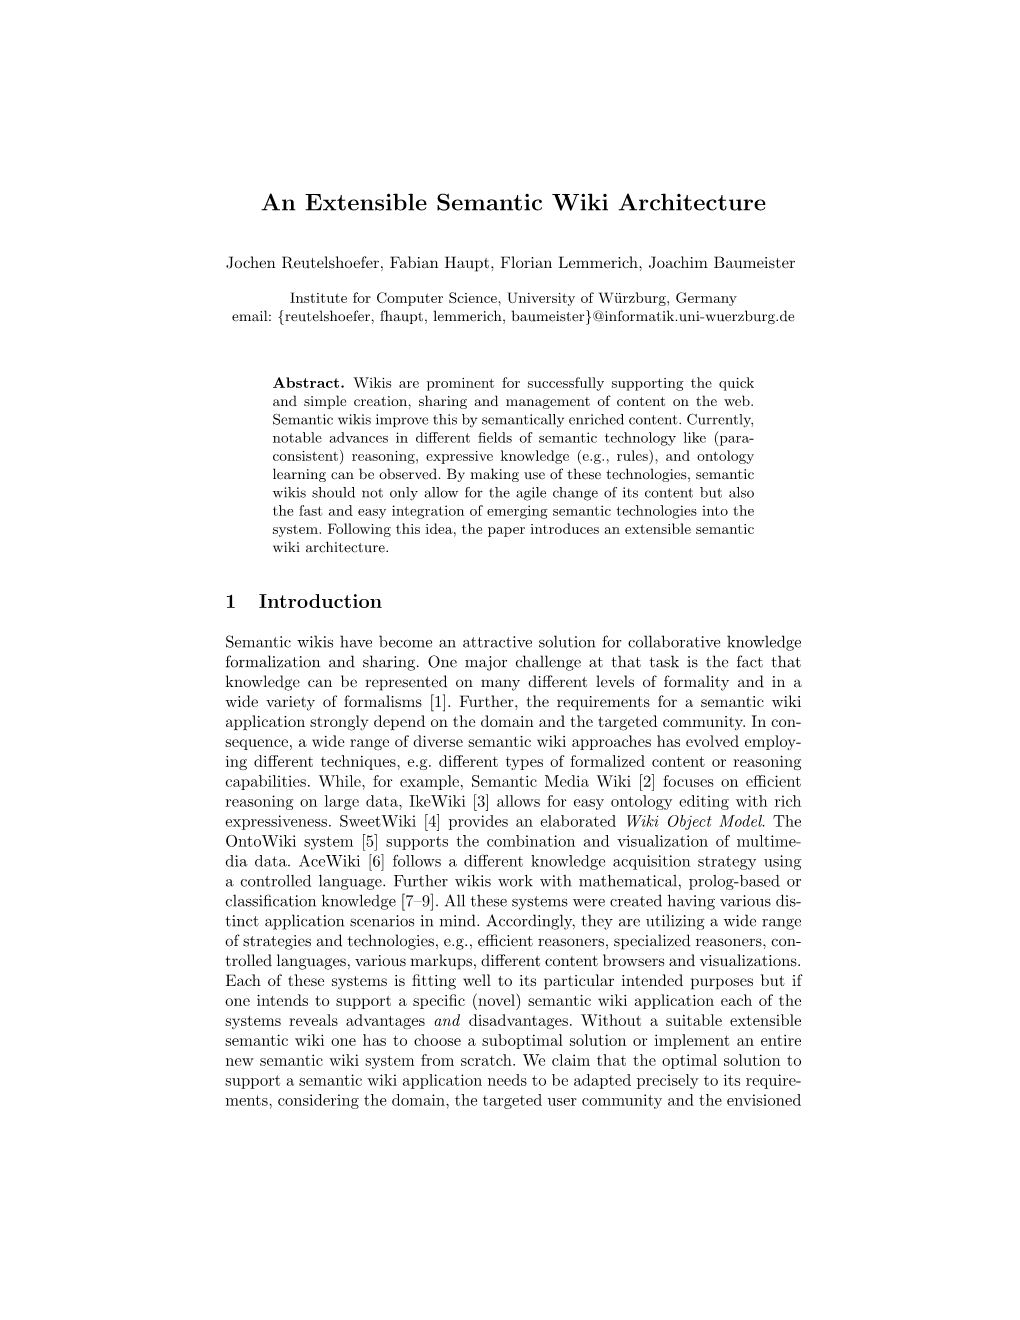 An Extensible Semantic Wiki Architecture